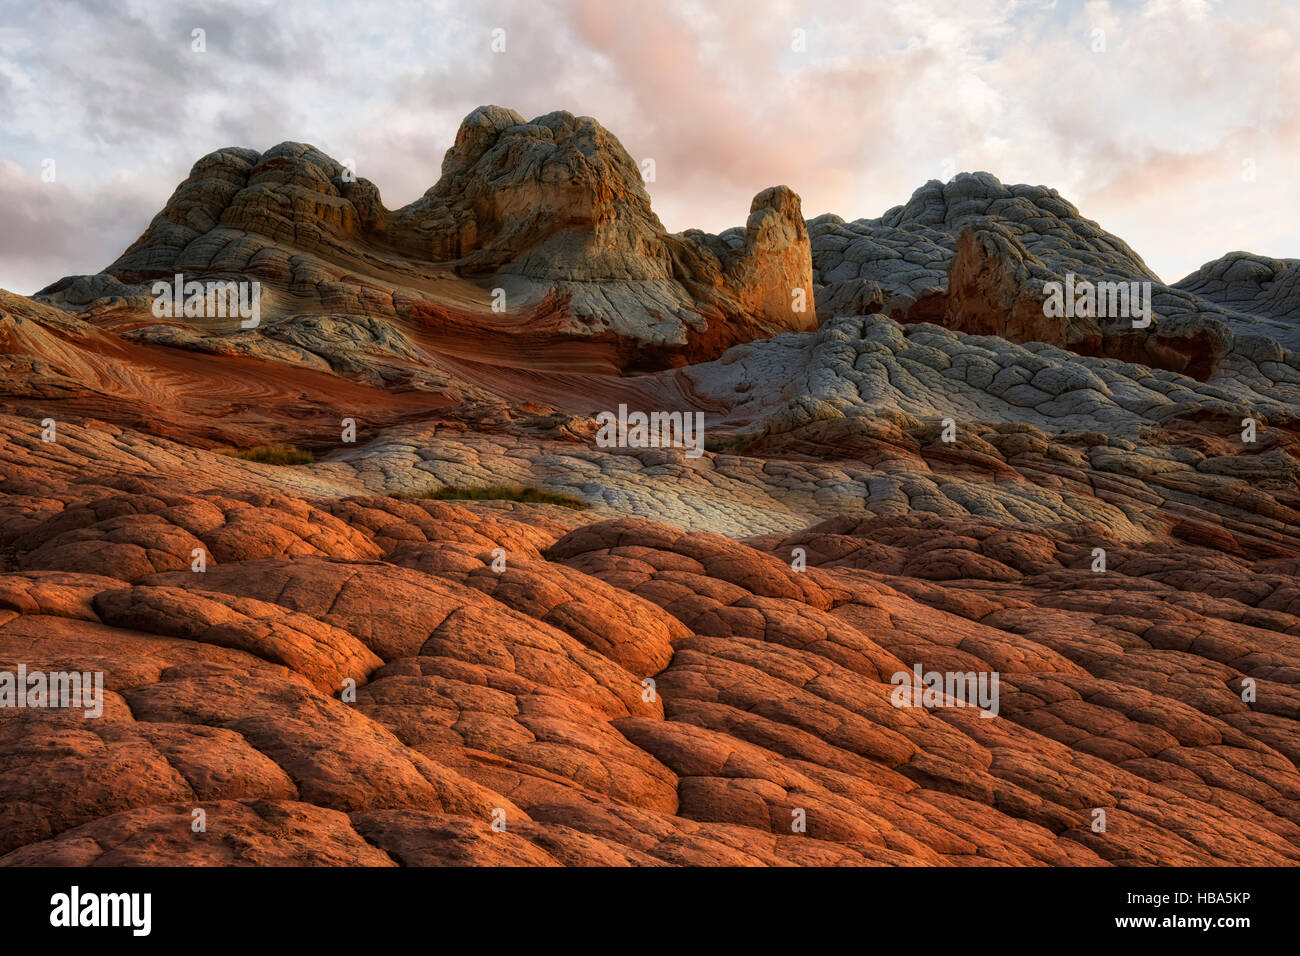 Sunset glow on the cross bedding brain rock and sandstone formations in Arizona's remote White Pocket and Vermilion Cliffs National Monument. Stock Photo